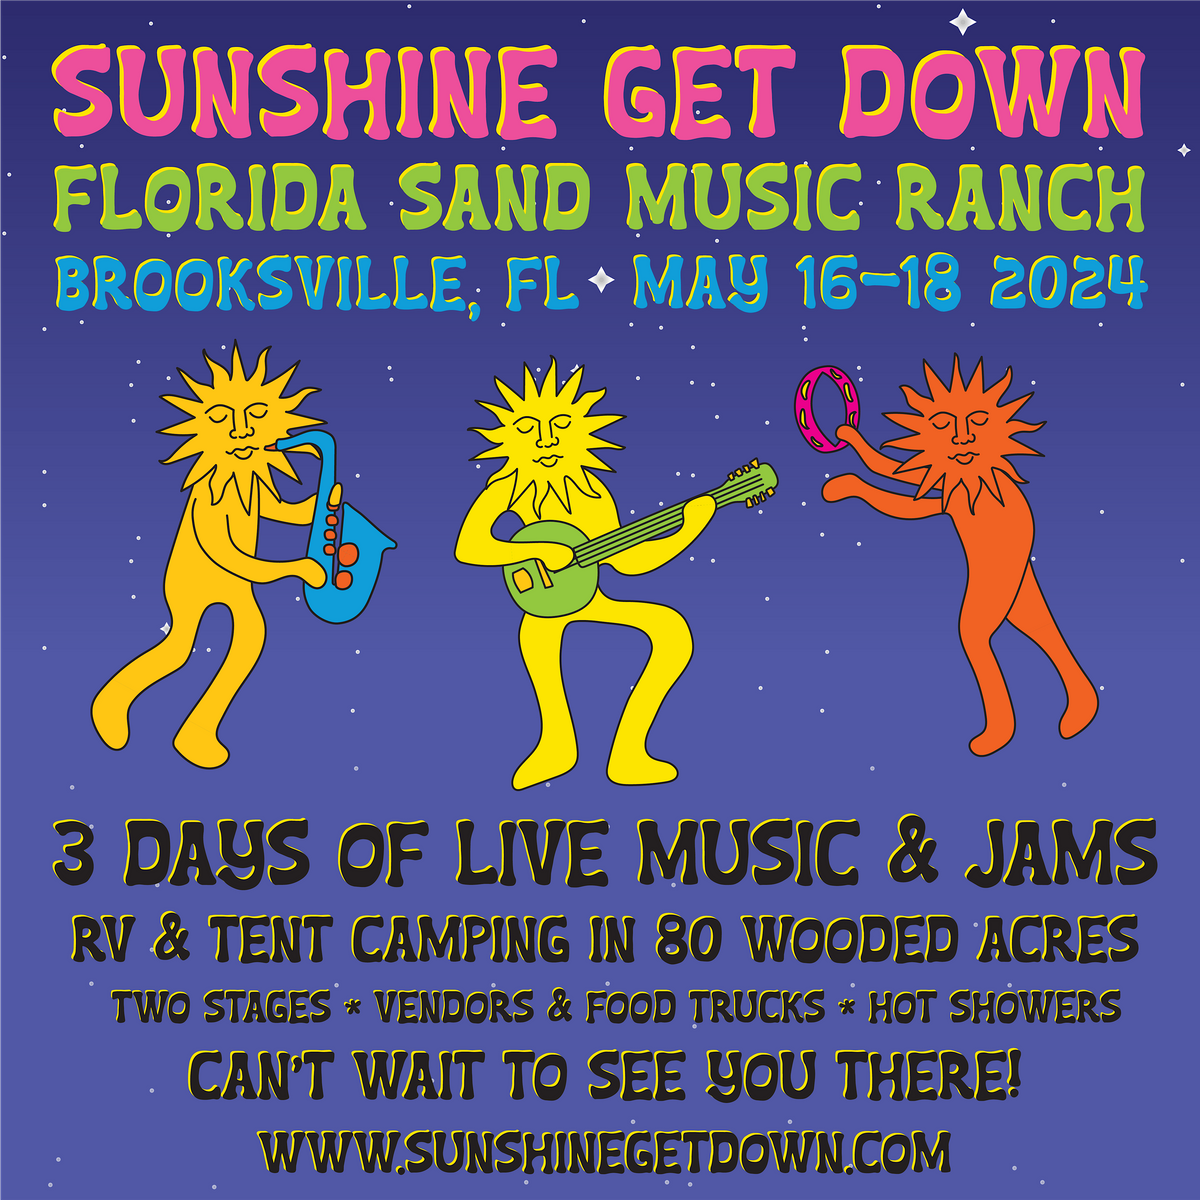 Second Annual Sunshine Get Down at Florida Sand Music Ranch